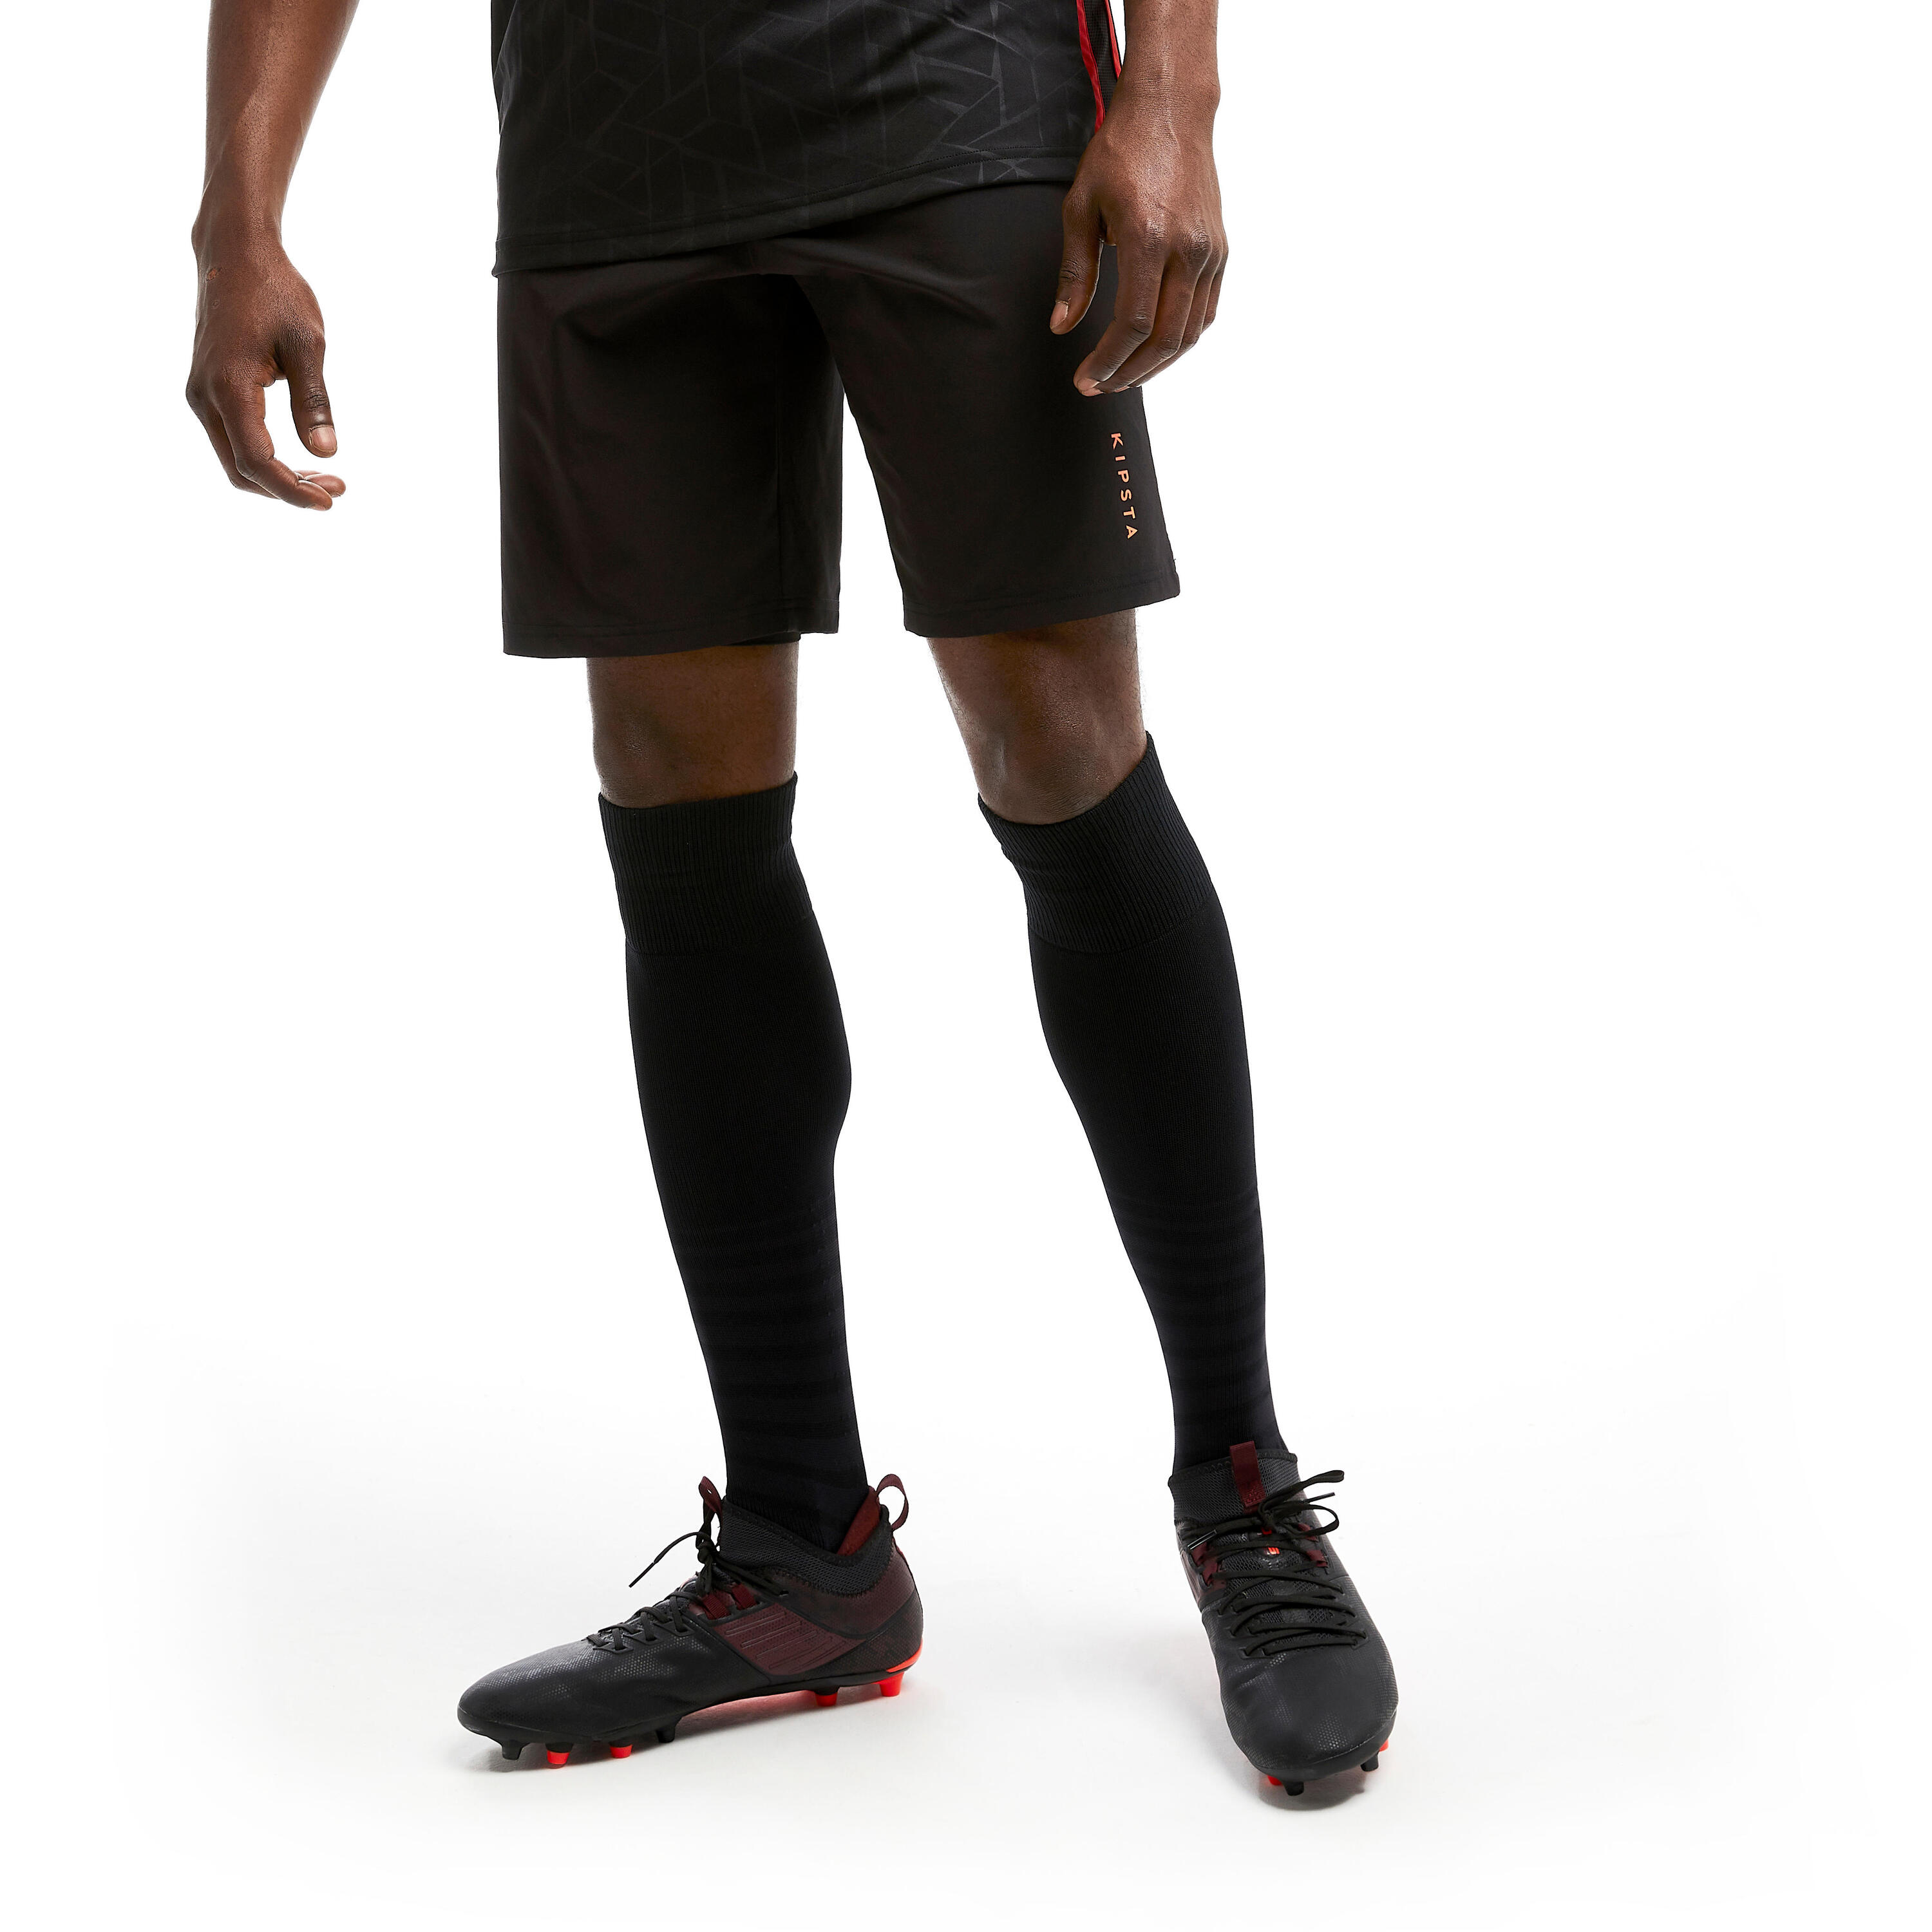 Adult 3-in-1 Football Shorts Traxium - Black/Red 3/9